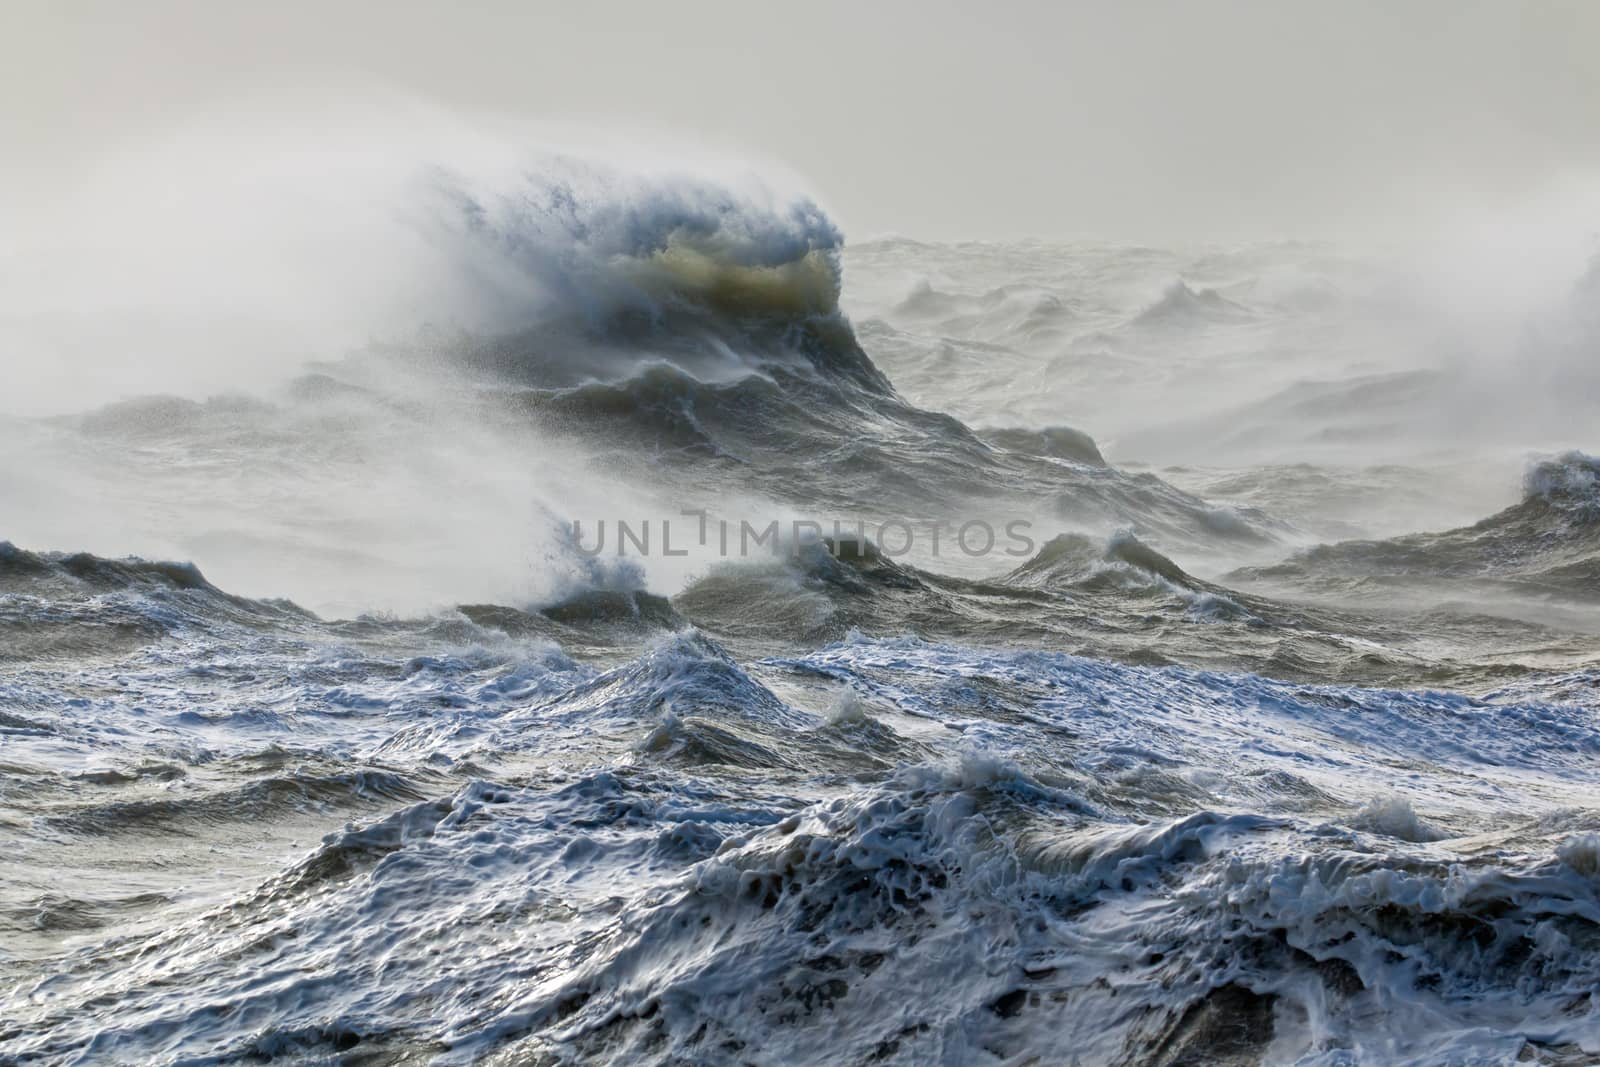 Storm Doris blowing spindrift from rough sea at Newhaven, East Sussex, during February 2017